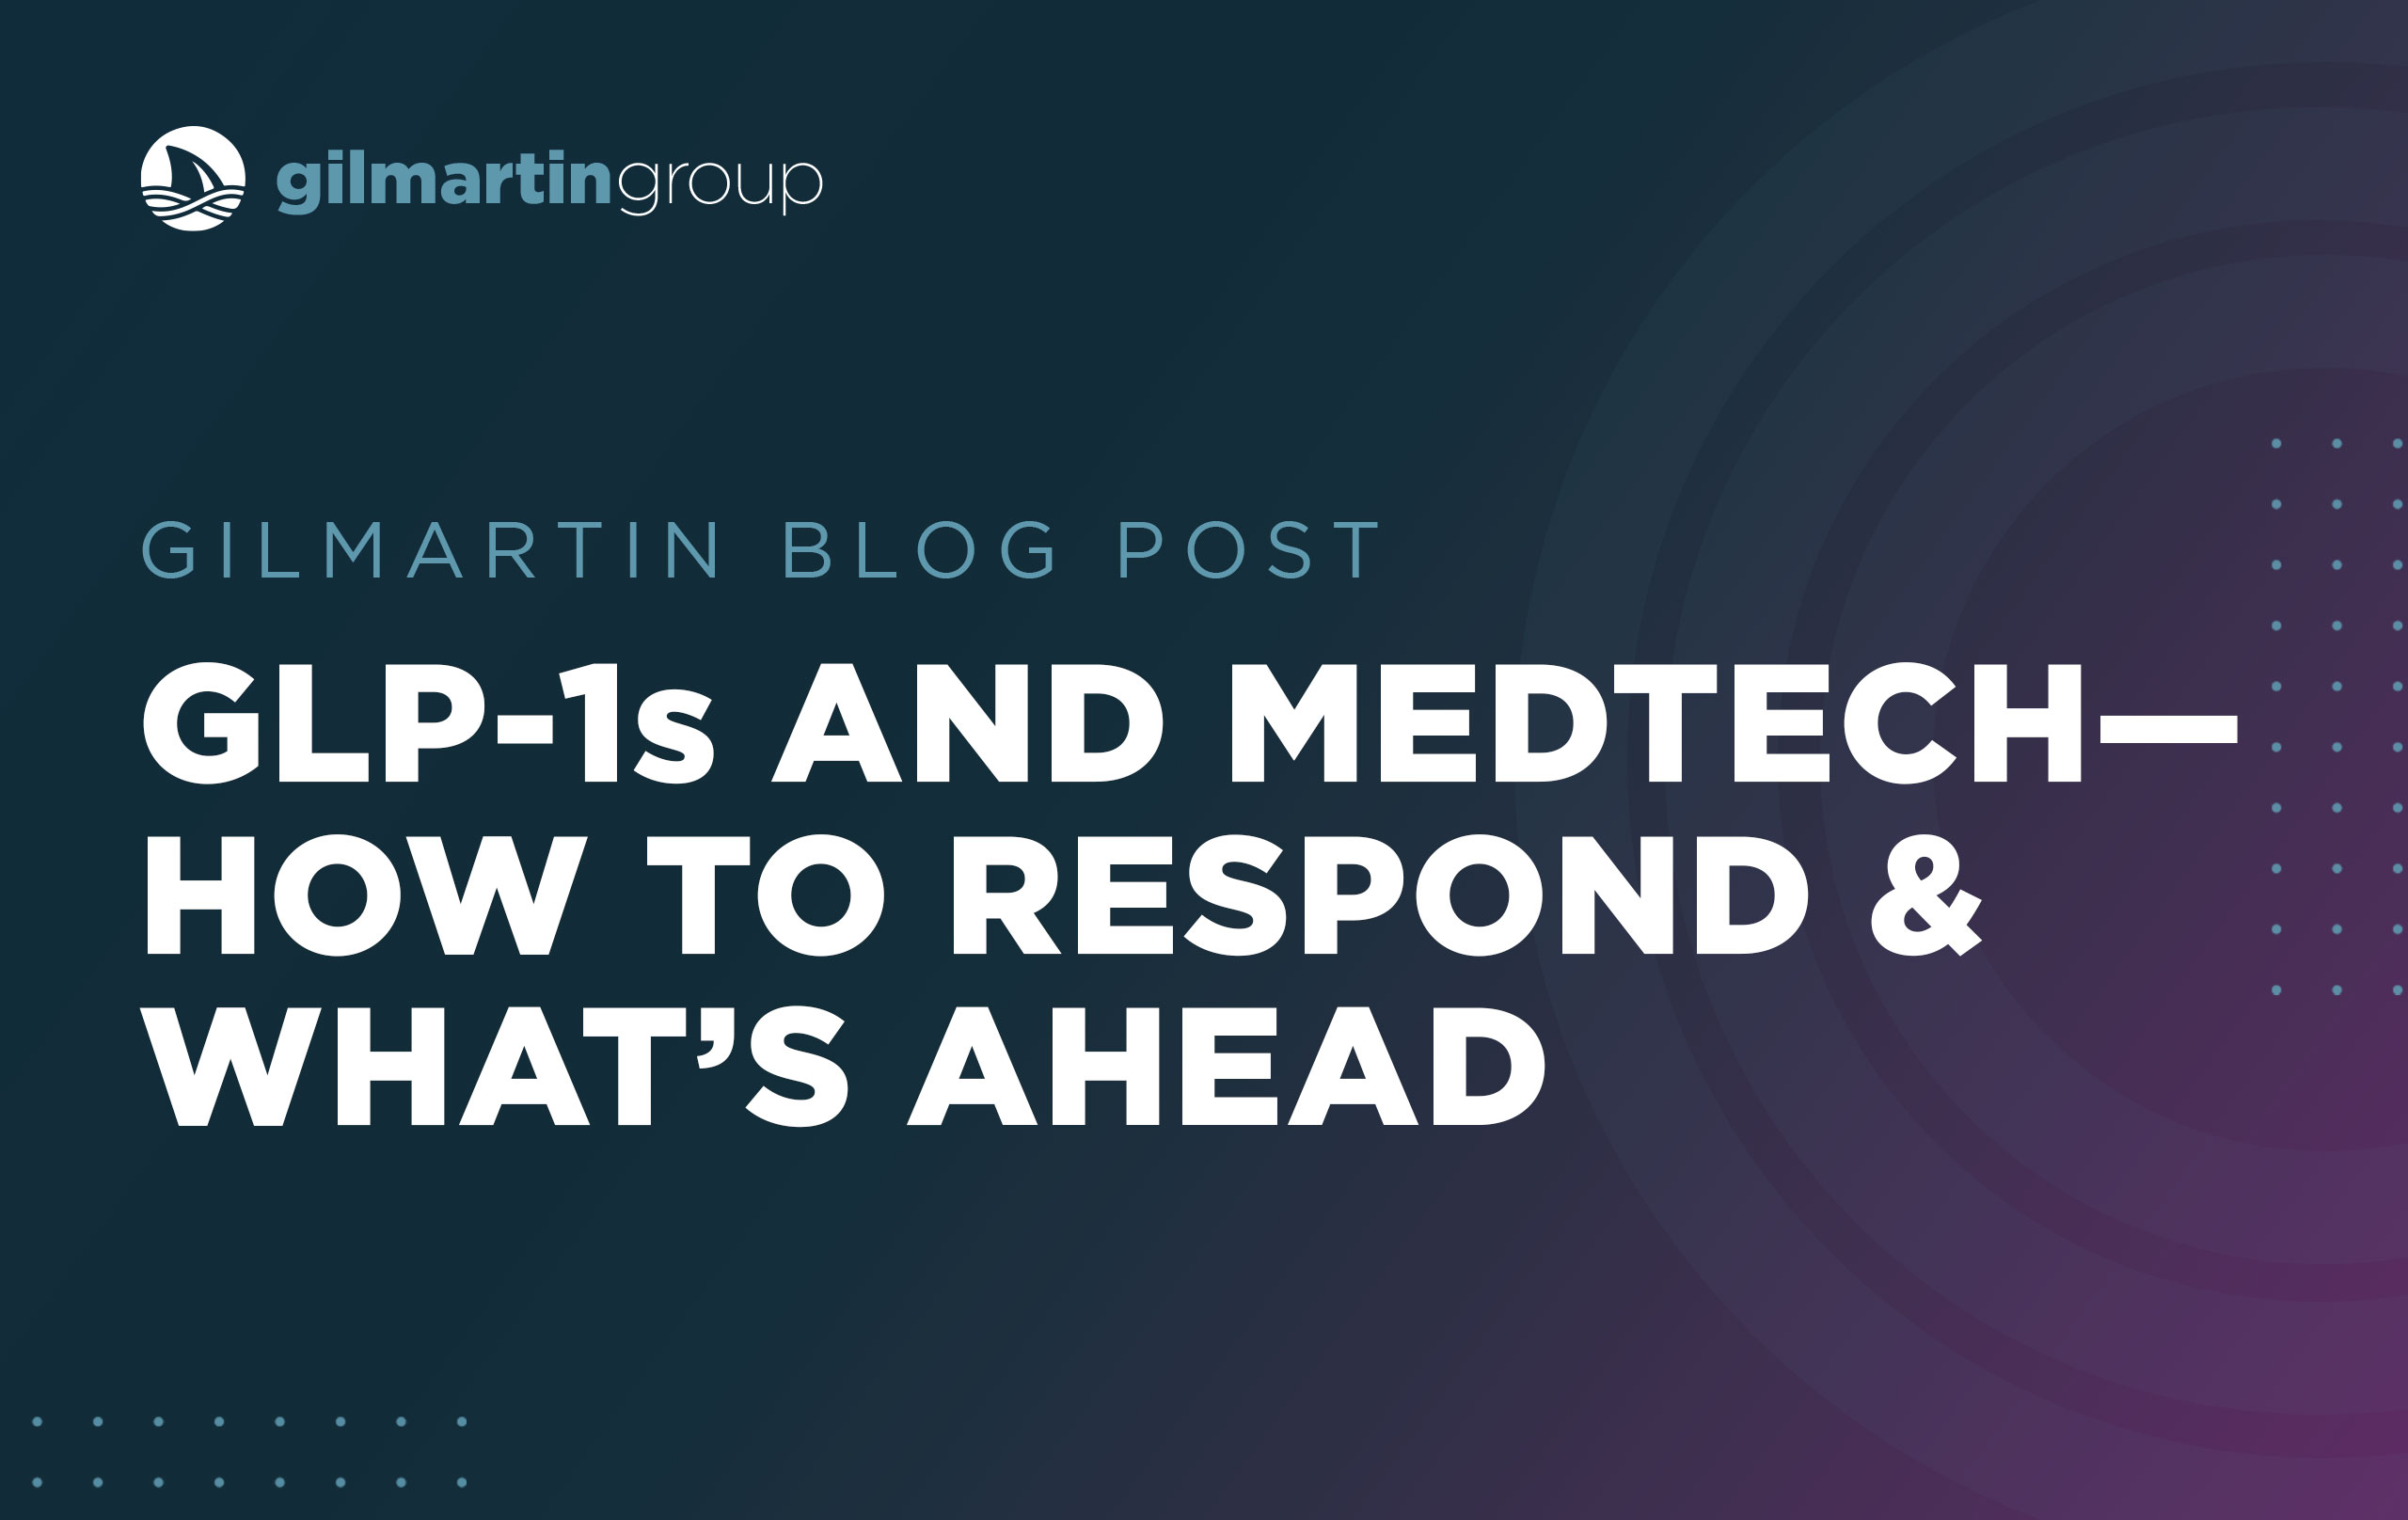 image for GLP-1s and MedTech—How to Respond & What’s Ahead